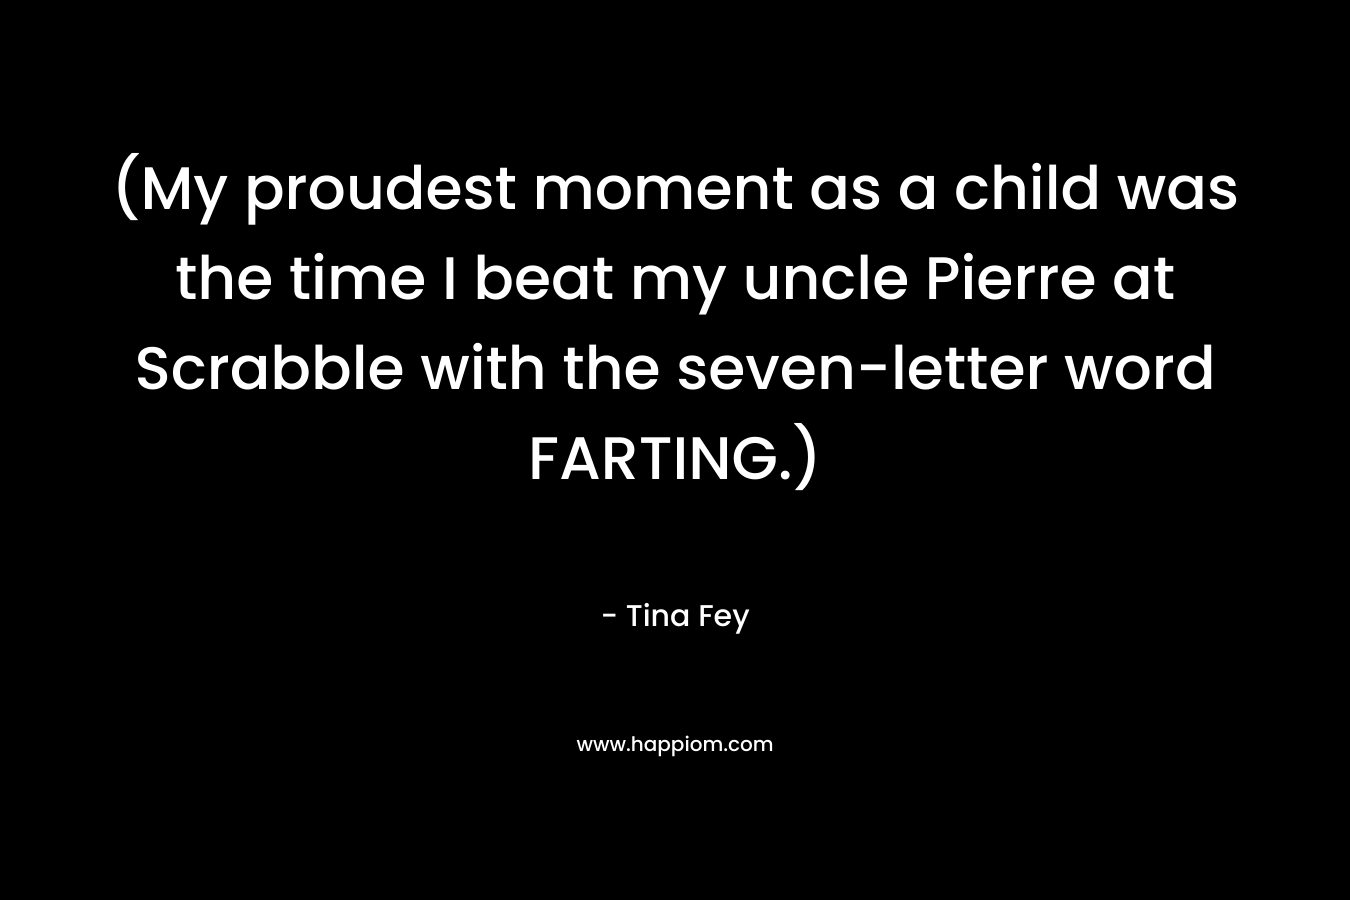 (My proudest moment as a child was the time I beat my uncle Pierre at Scrabble with the seven-letter word FARTING.) – Tina Fey